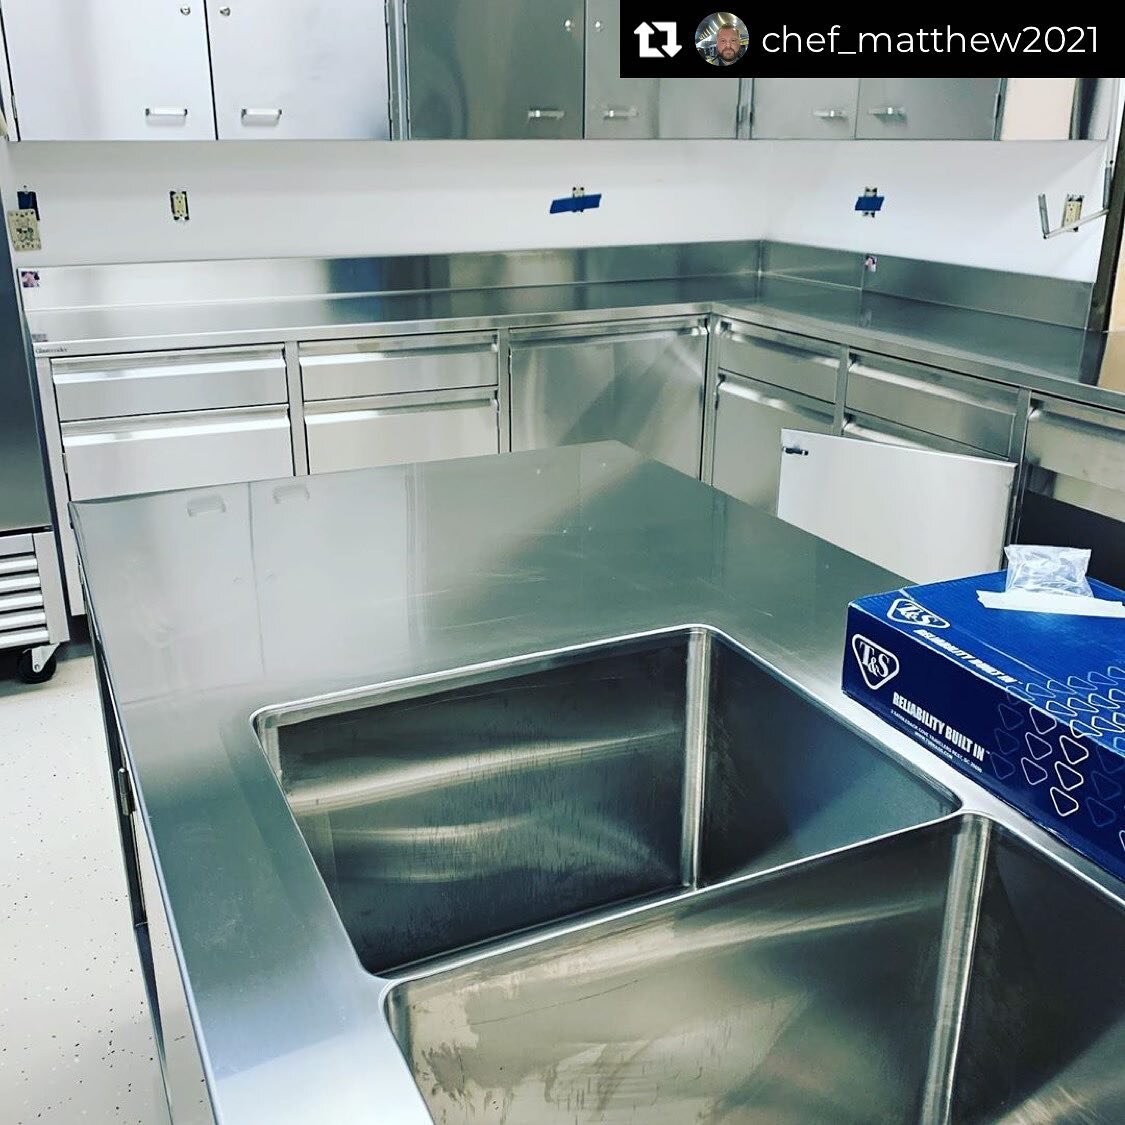 How do you not show off the collaboration of @chef_matthew2021 and @glastenderinc pairing up for some amazing stainless steel fabrication!  #glcds #glcd #glculinarydesigns #culinarydesigners #culinarydesigns #foodservicedesigners #foodservicedesign #